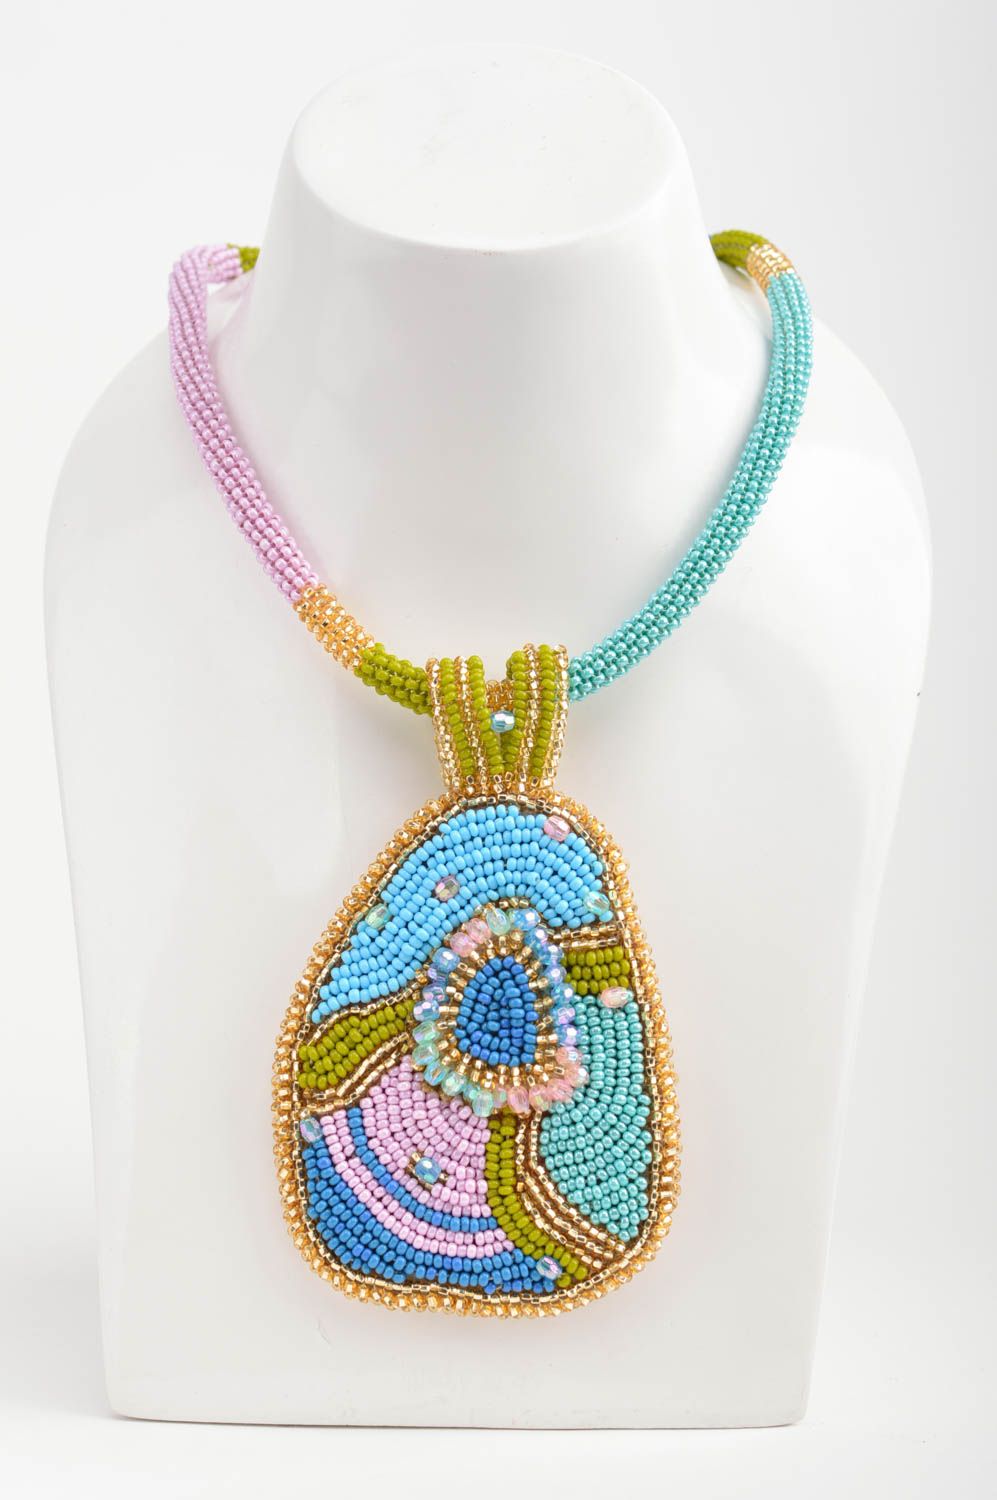 Handmade designer massive colorful beaded cord necklace with pendant photo 1